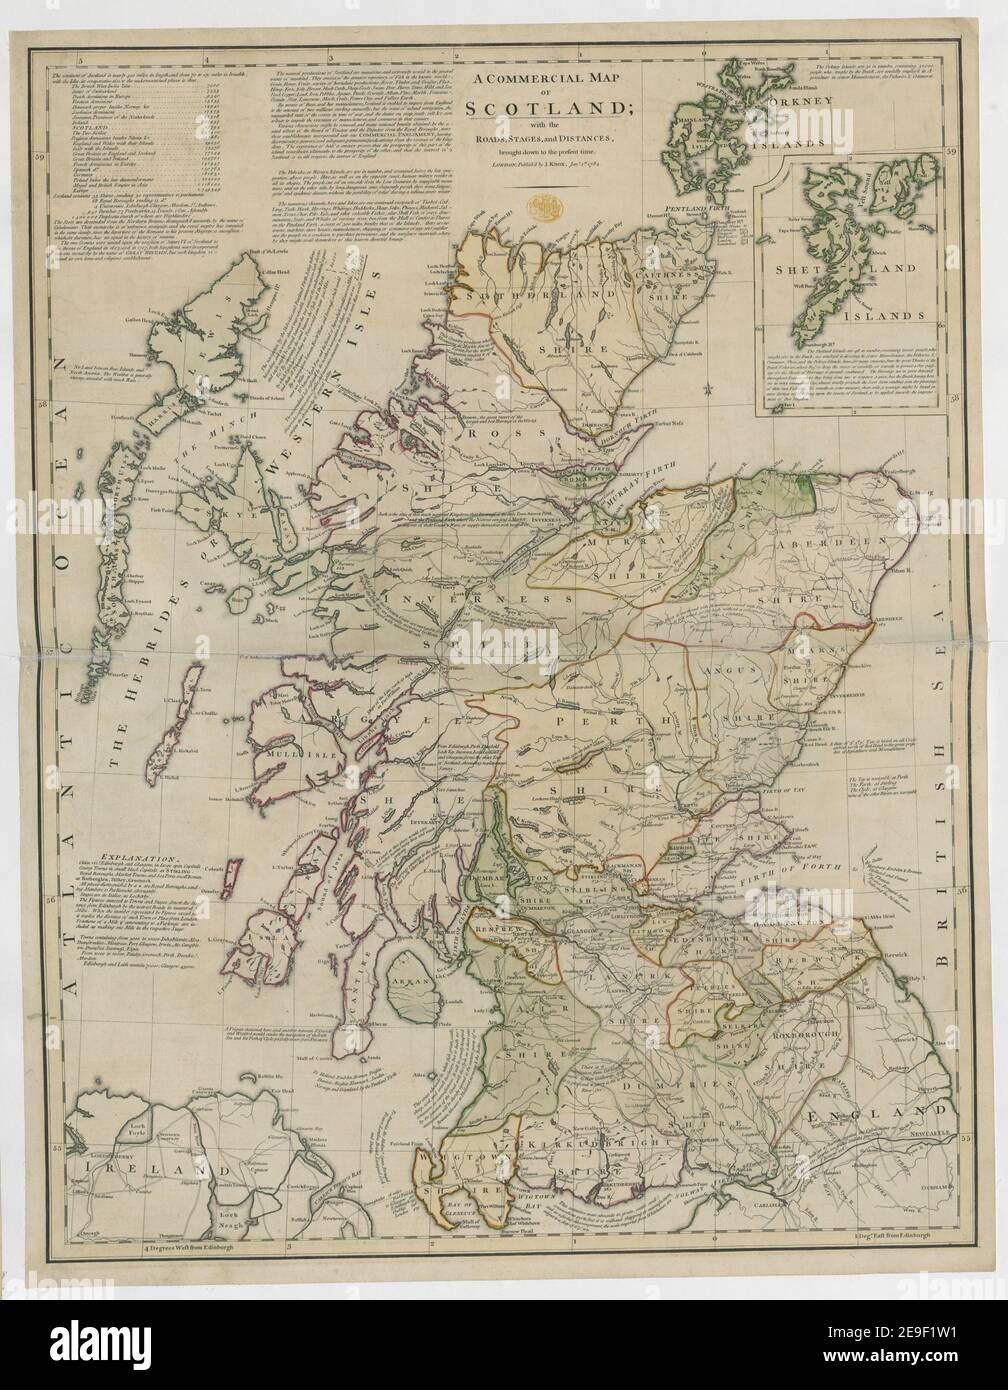 A COMMERCIAL MAP of SCOTLAND  Author  Knox, John 48.30. Place of publication: London Publisher: Publish'd by J. Knox. Jan.y 1.st, Date of publication: 1784.  Item type: 1 map Medium: copperplate engraving, hand colour Dimensions: 70 x 53 cm  Former owner: George III, King of Great Britain, 1738-1820 Stock Photo